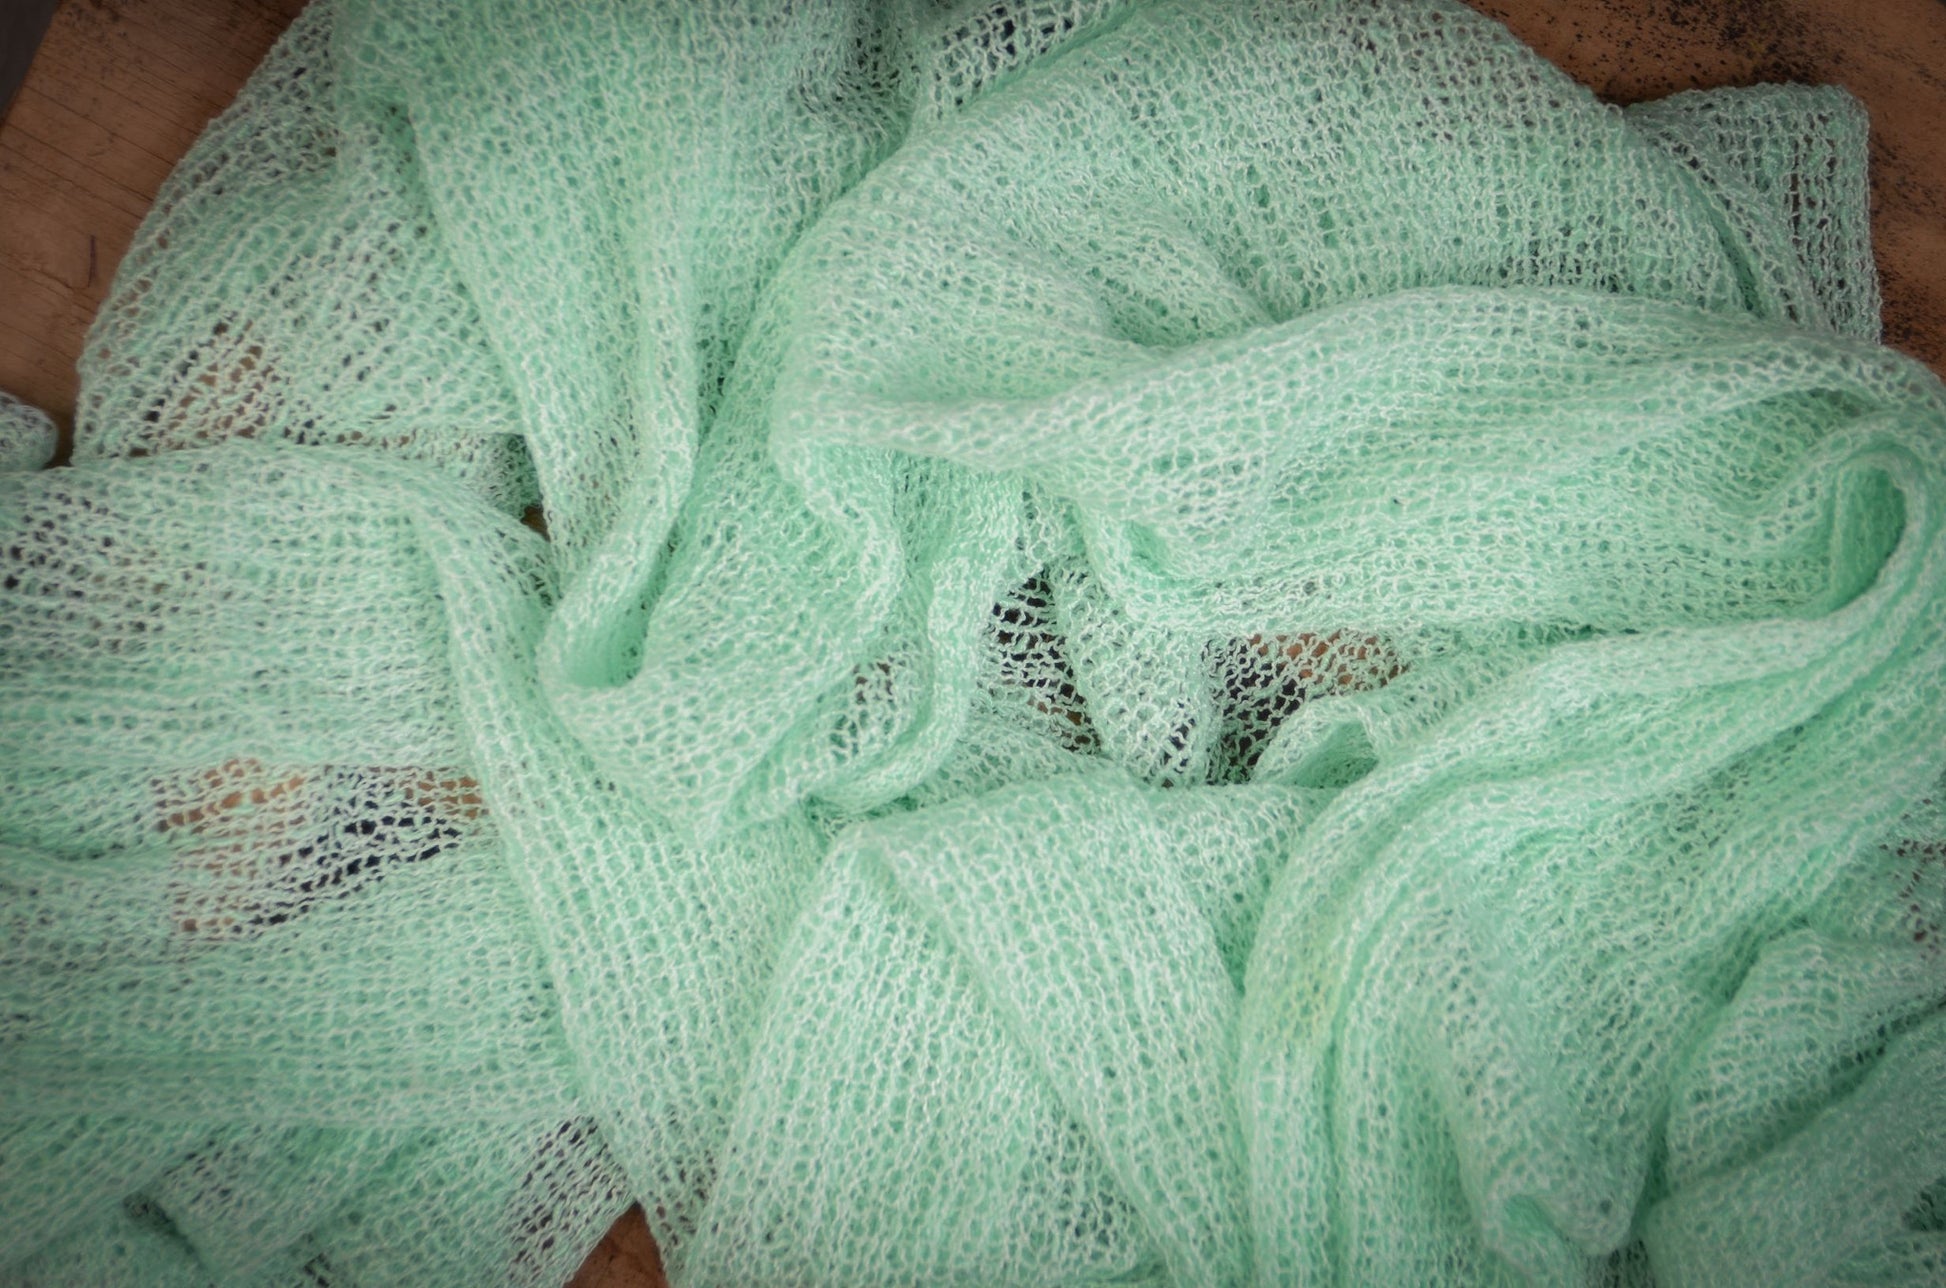 Stretch Knit Baby Wrap - Mint Green-Newborn Photography Props